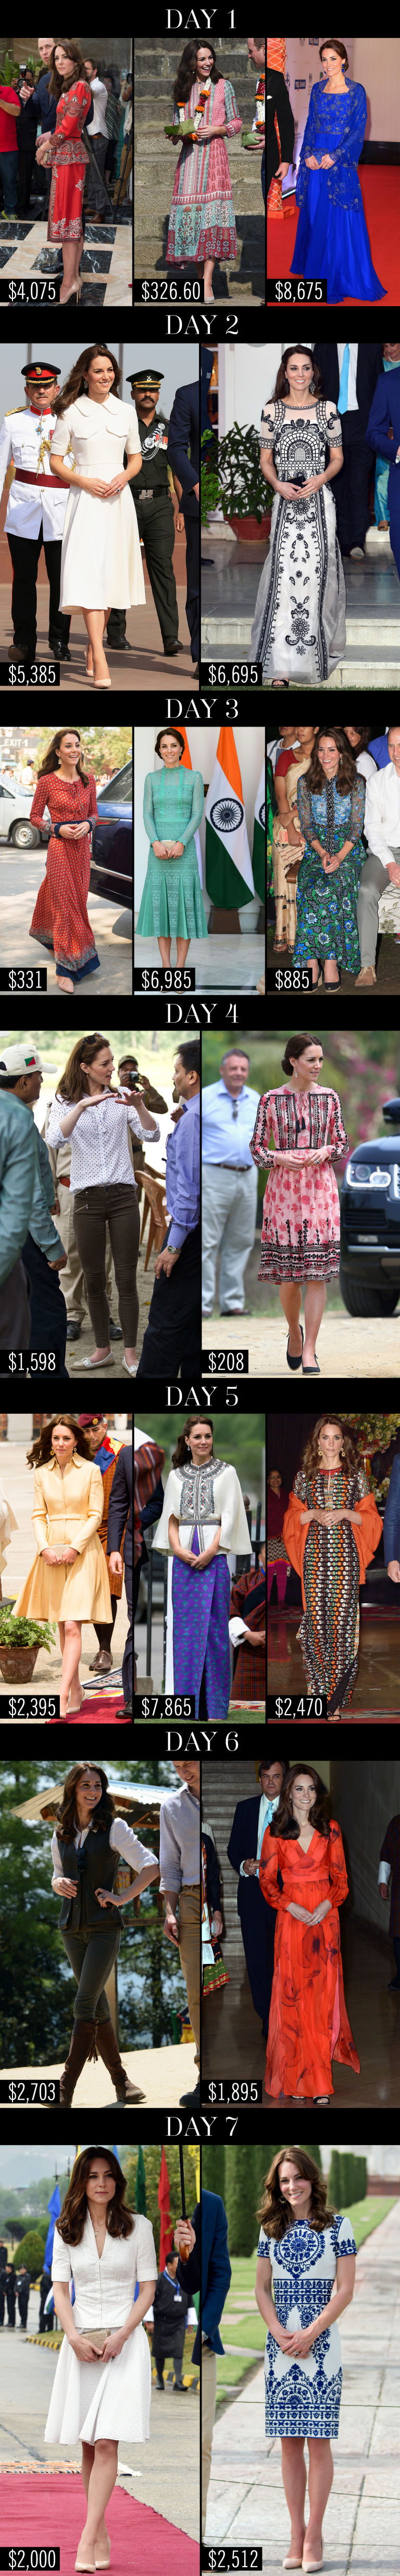 1461069836-syn-hbz-1461068852-syn-elm-1461015136-kate-middleton-outfit-prices